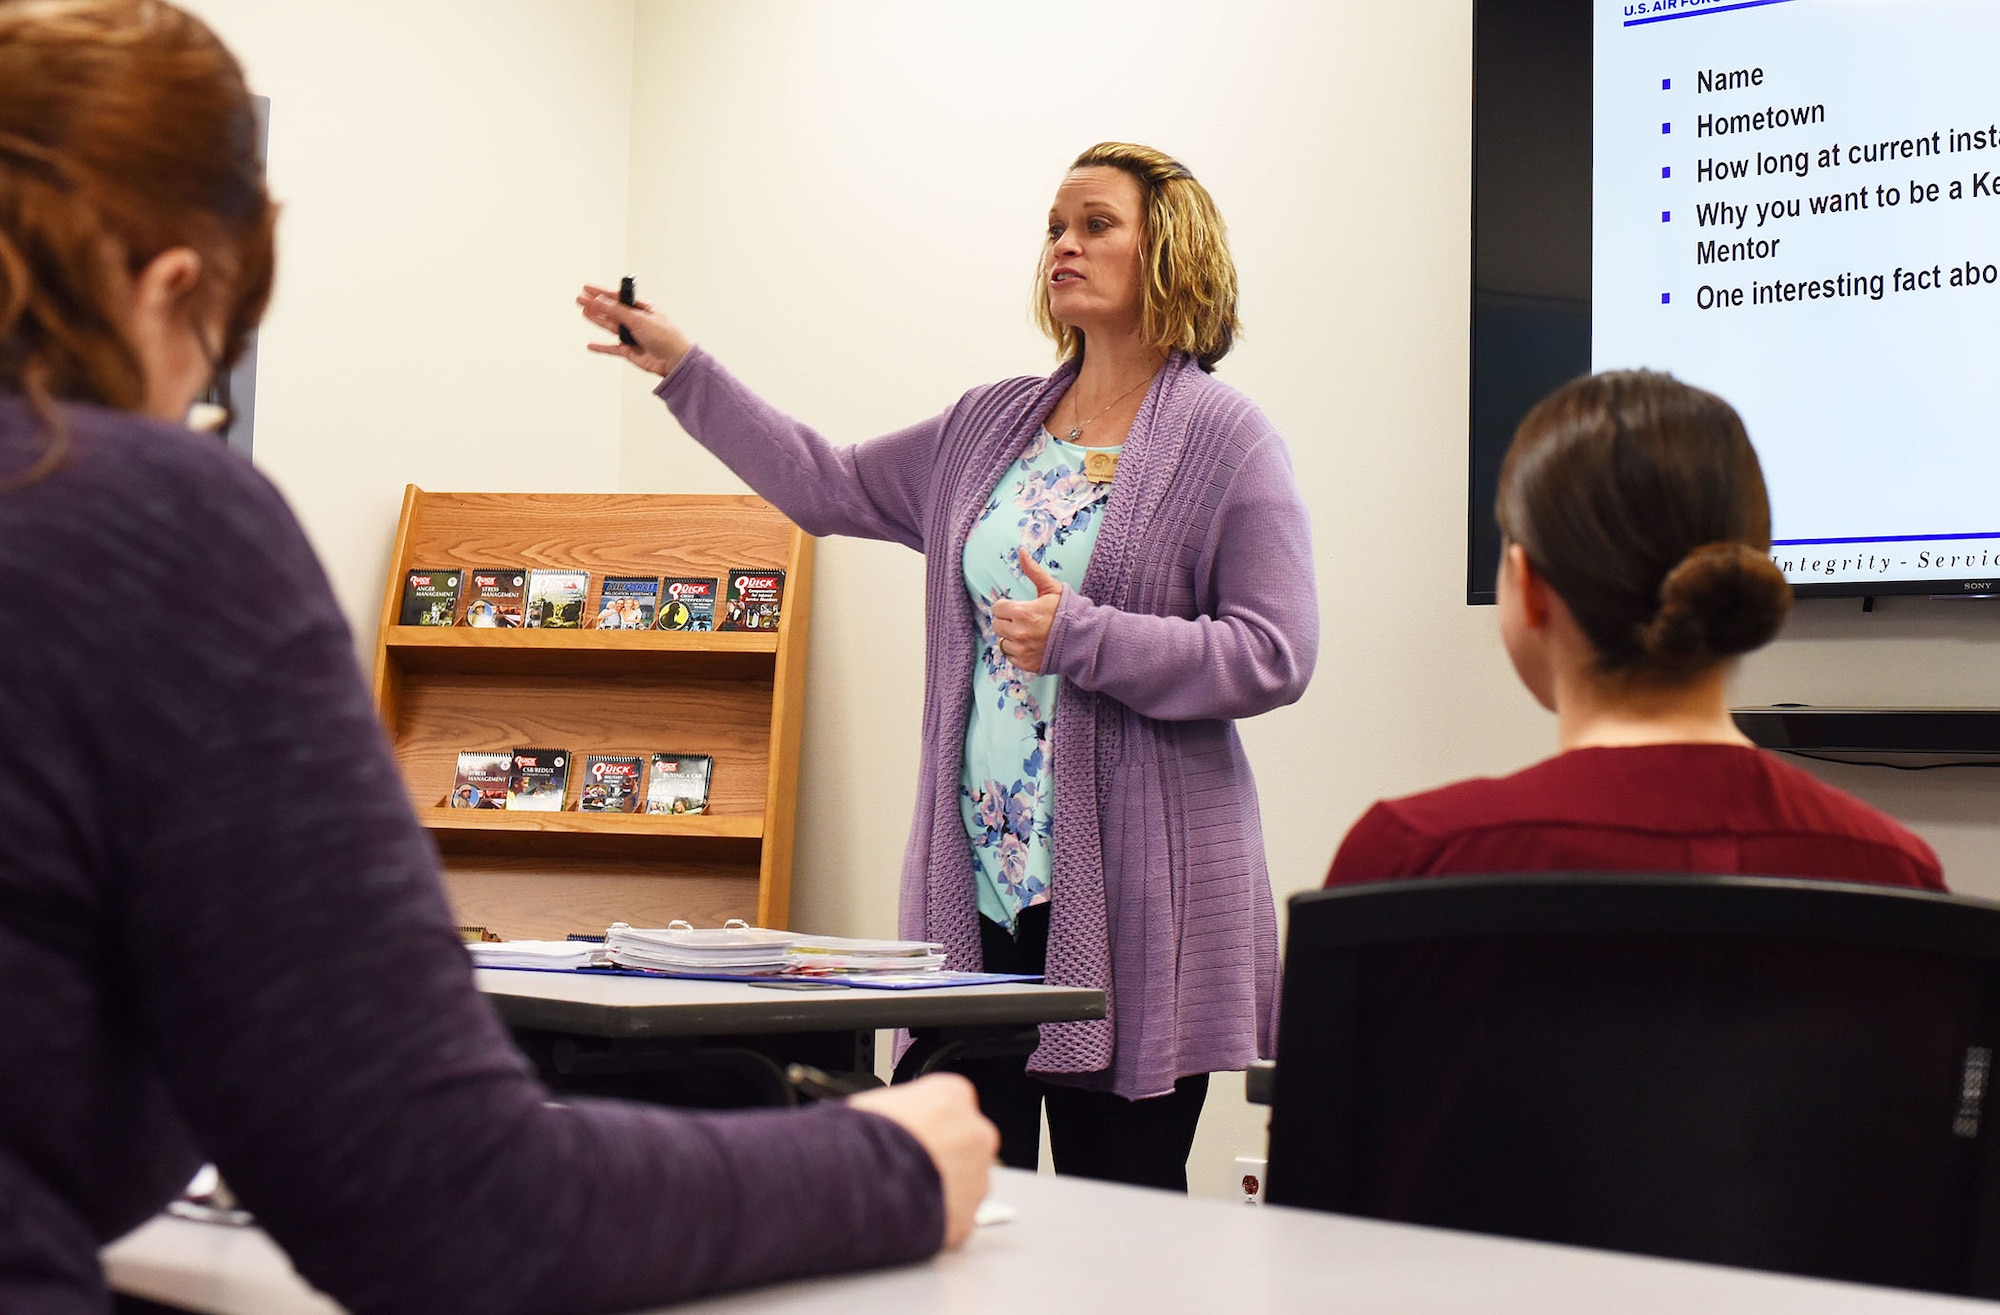 As the key spouse group coordinator, Dawn Beal conducts orientation sessions. She begins the session with an icebreaker for volunteers Dec. 28, 2017, at the Airman and Family Readiness Center, Malmstrom Air Force Base, Mont.